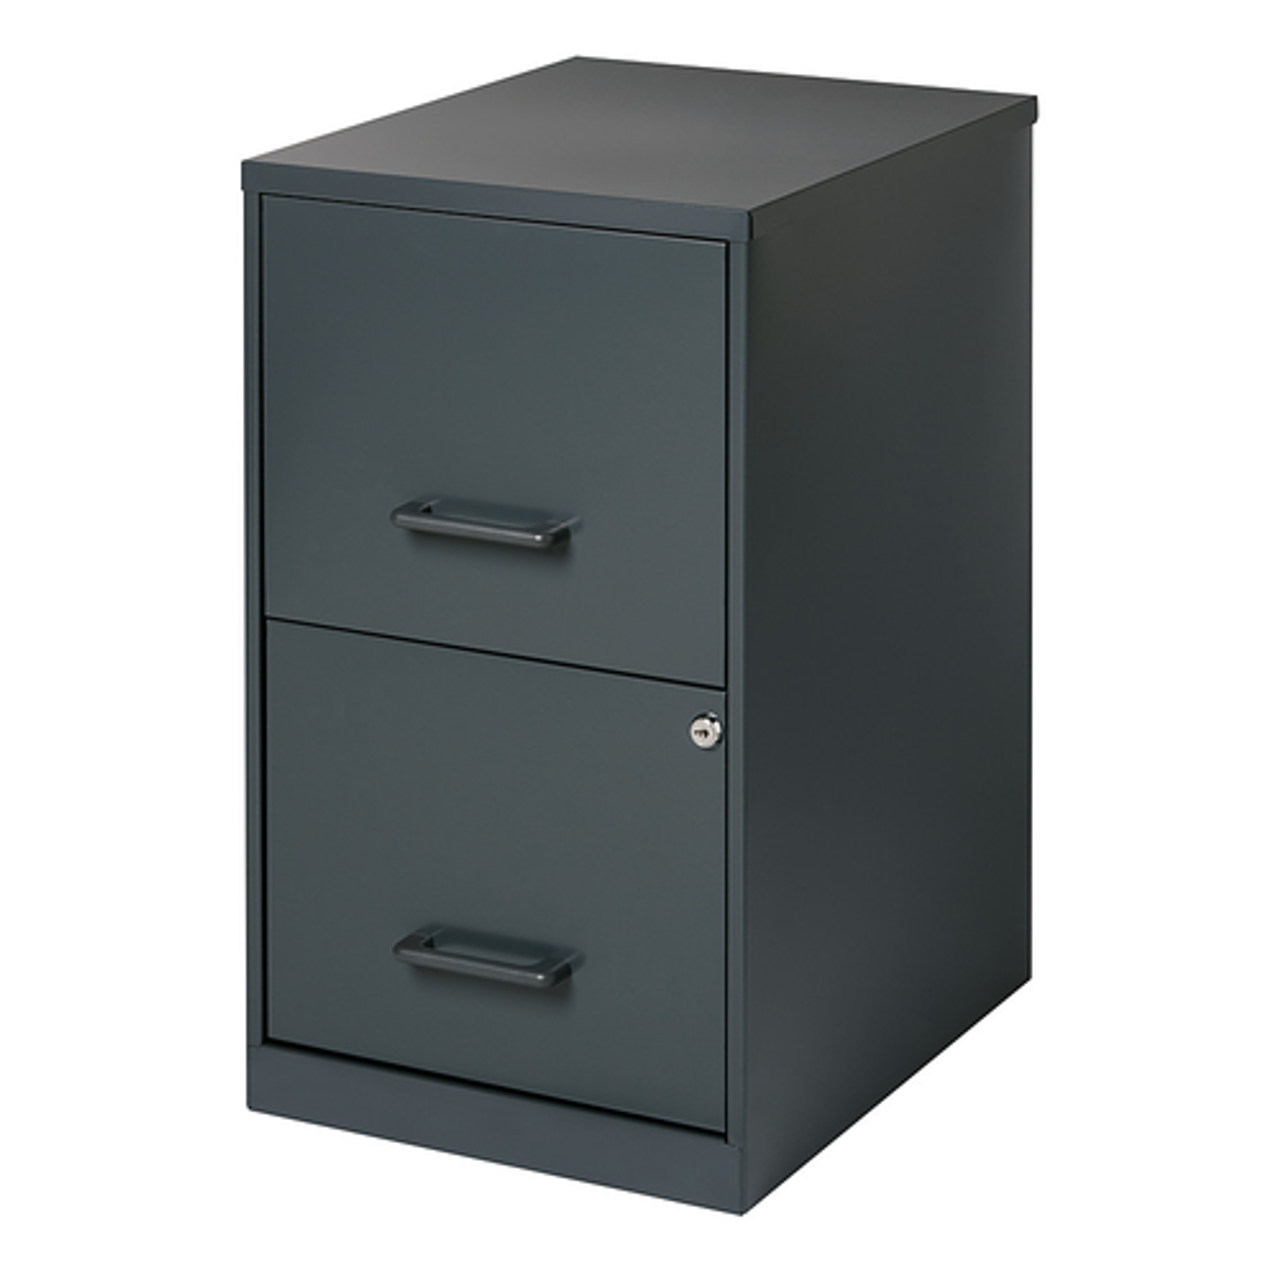 Hirsh - Office Designs 18in. 2-Drawer Metal File Cabinet - Charcoal